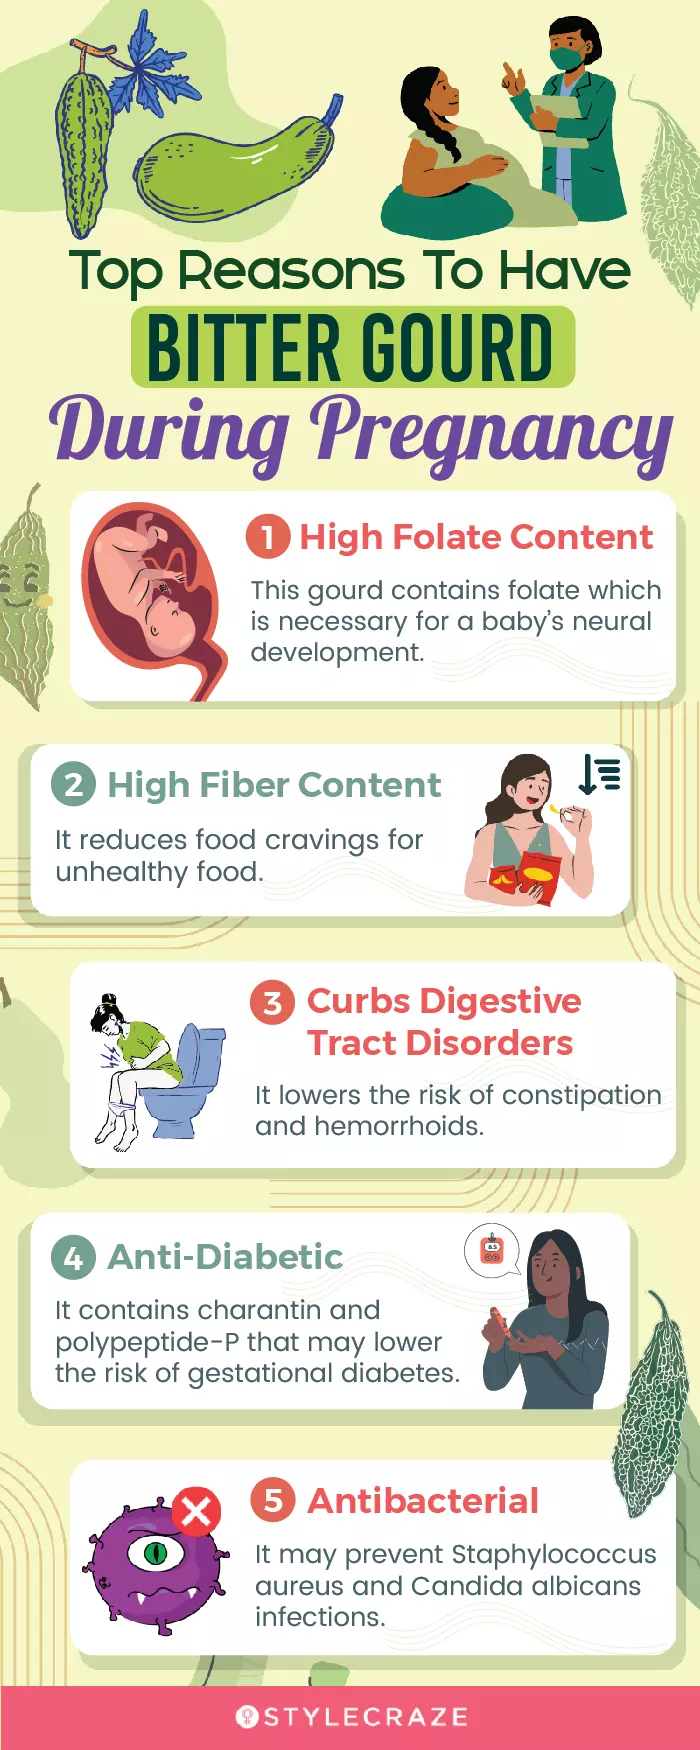 top reasons to have bitter gourd during pregnancy (infographic)